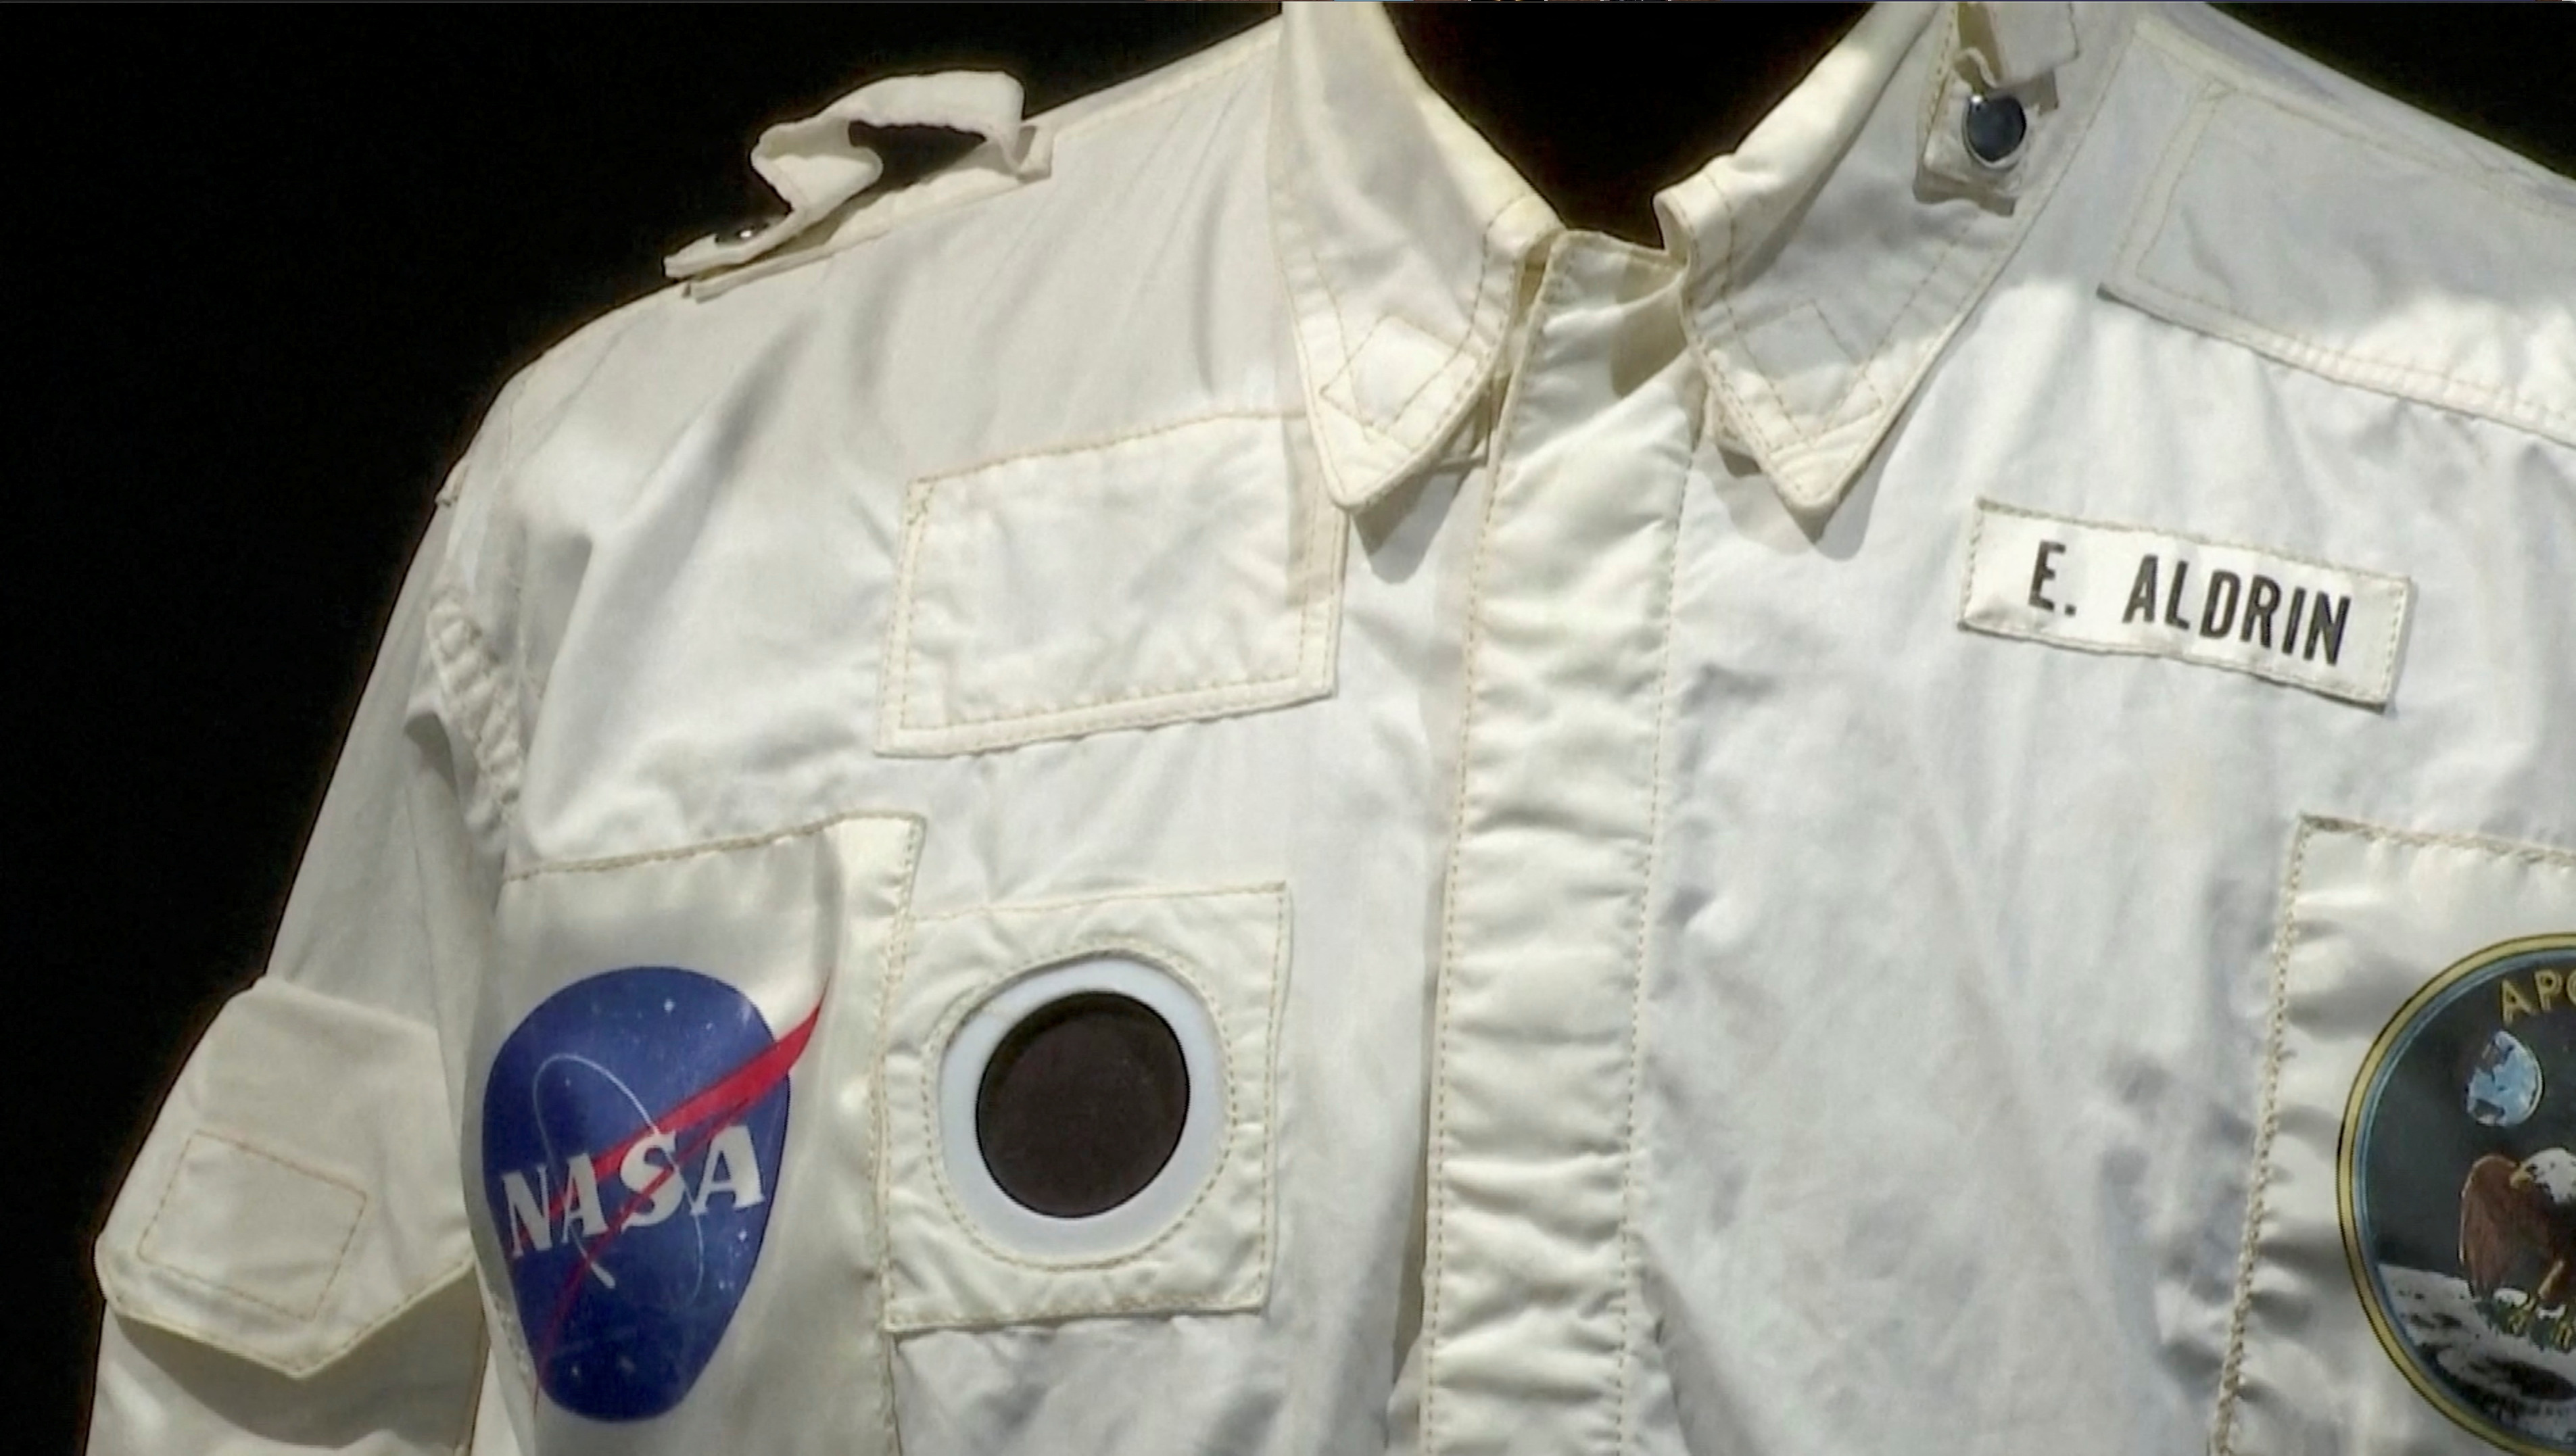 Buzz Aldrin's flown inflight coverall jacket, worn by him on his mission to the Moon and back during Apollo 11, sold for $2,772,500 at Sotheby's